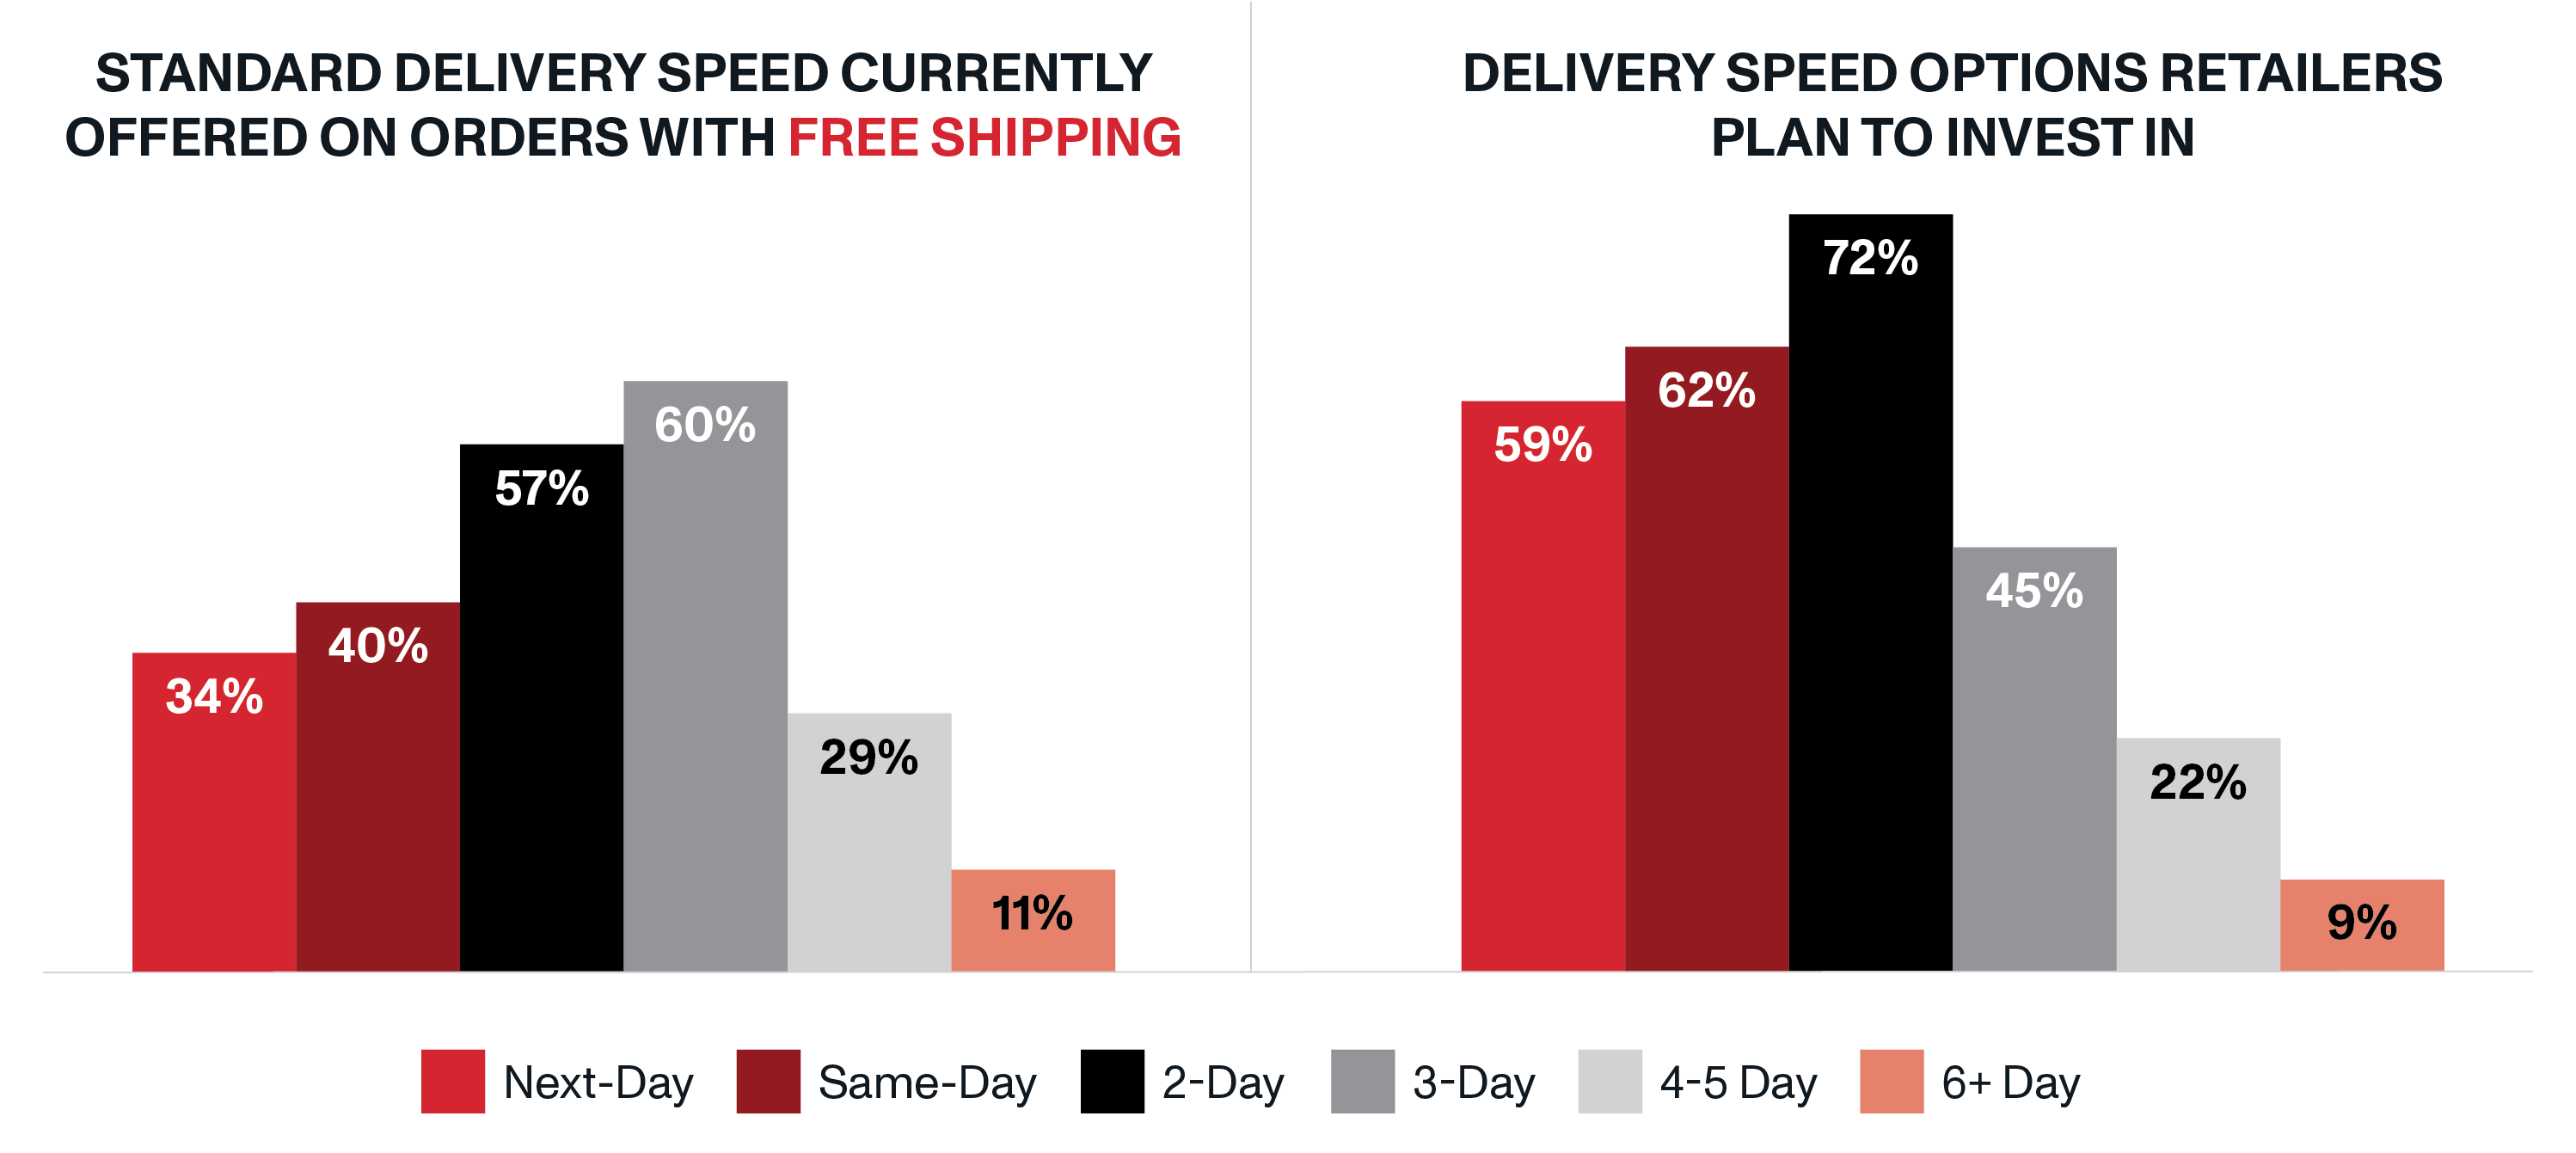 Delivery Speed Offered with Free Shipping vs. Speed Retailers Plan to Invest In | How Demand for Faster E-Commerce Delivery Is Driving Retailers’ Shipping Strategies | OnTrac Parcel Carrier